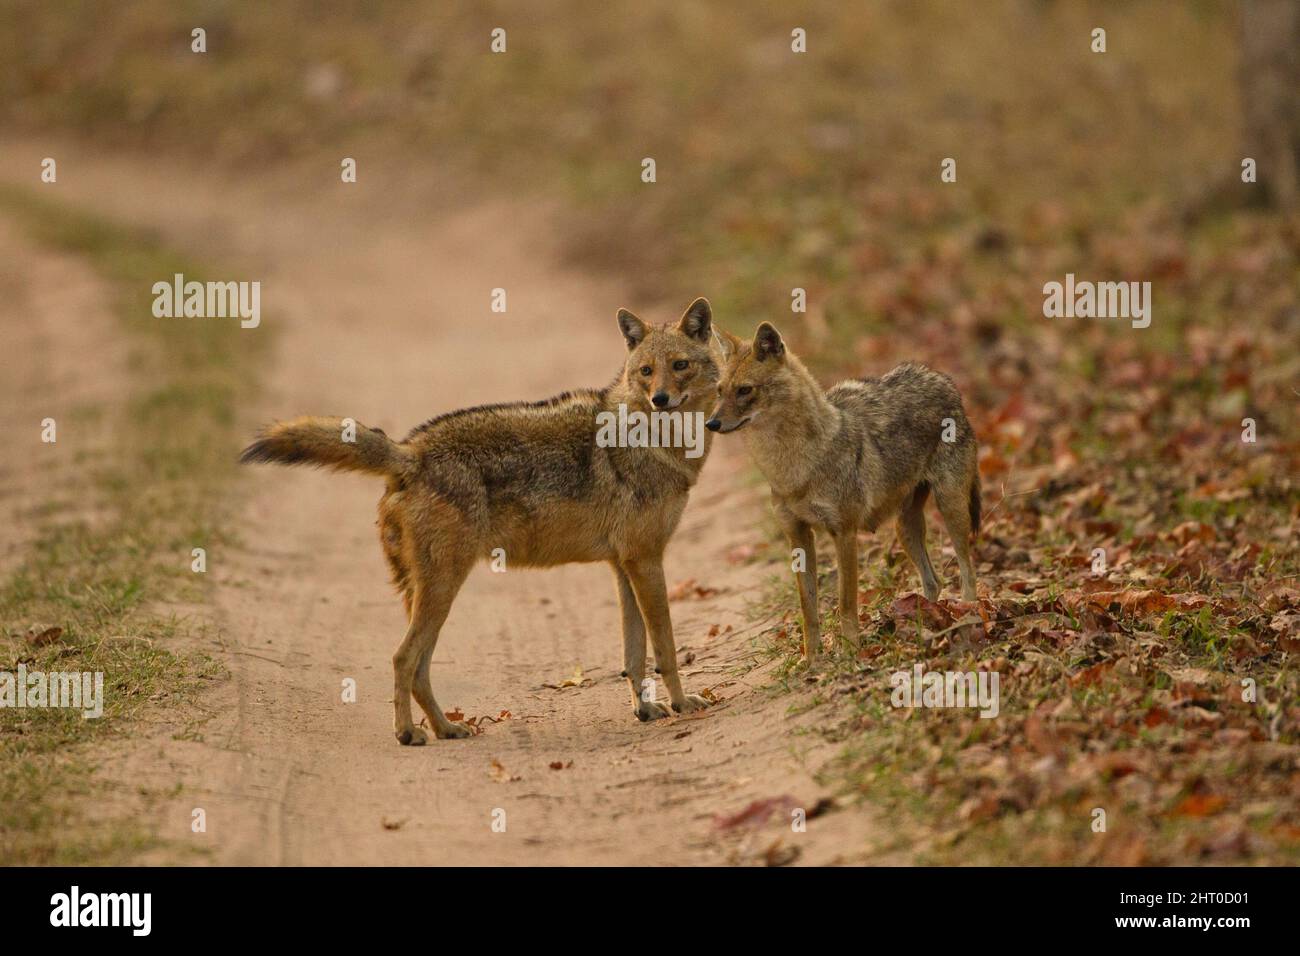 Indian jackals (Canis aureus indicus), adult and juvenile. Lives near habitations. scavenging offal and garbage, also eating rodents, reptiles and fru Stock Photo